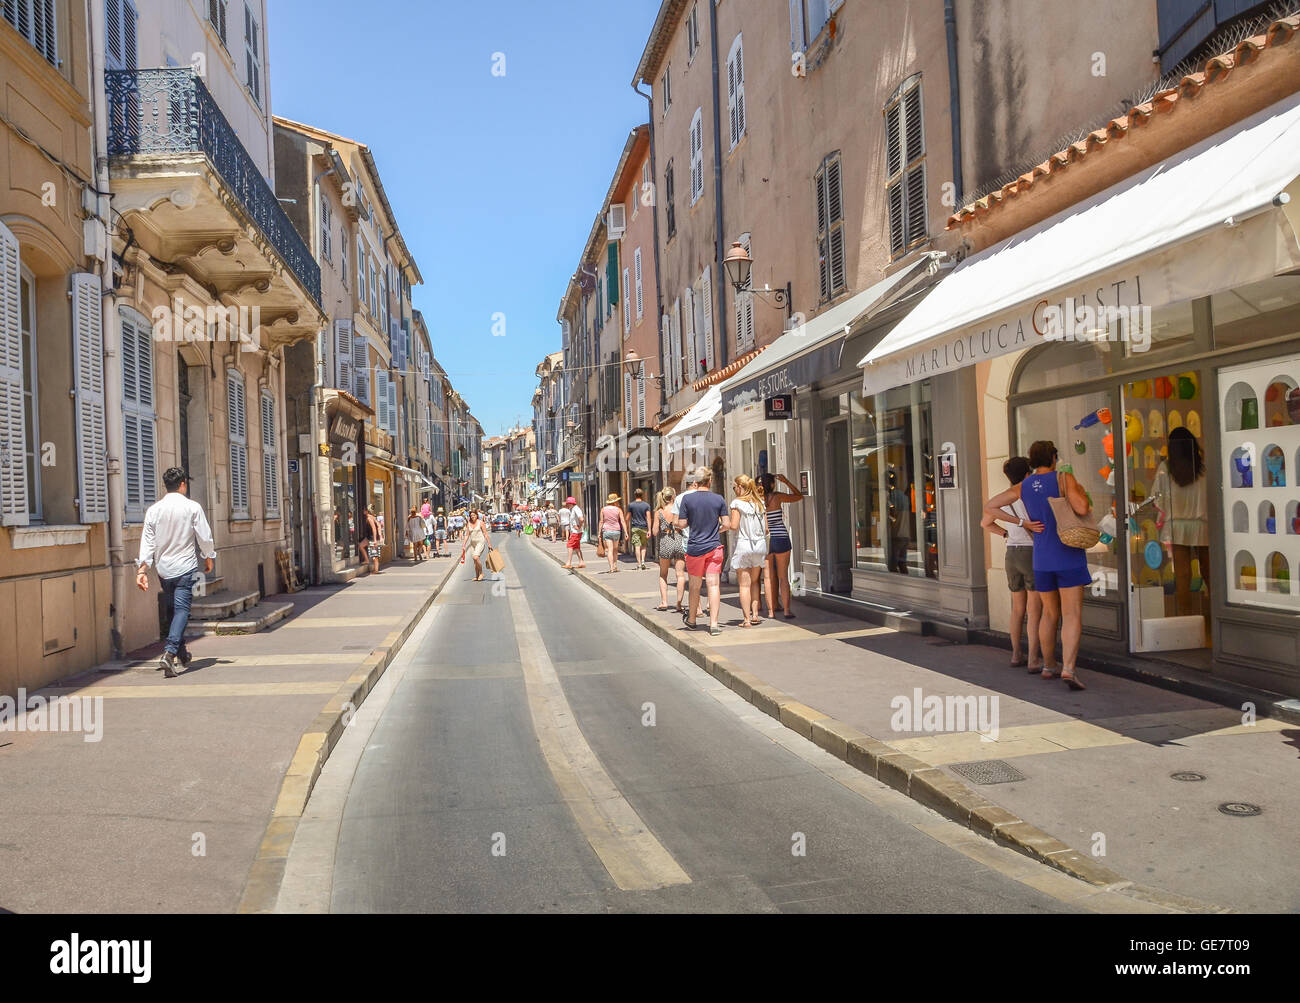 Shopping street in St. Tropez, France Stock Photo